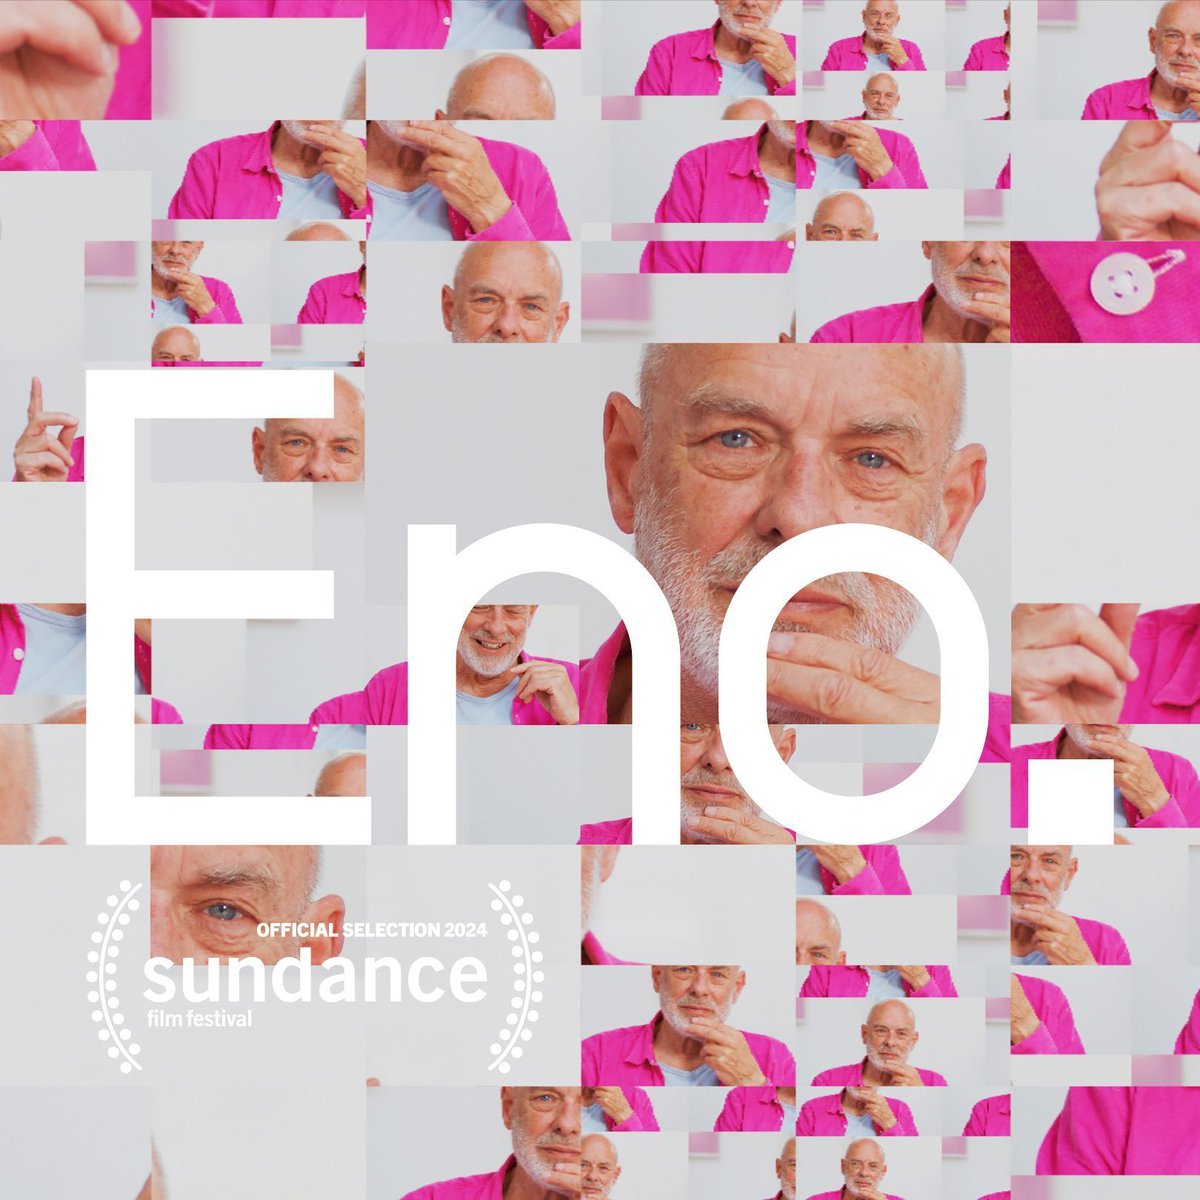 We're excited to once again partner with @mkefilm to present you an opportunity to win 4 free tickets to 'Eno' on Wed., May 22nd at the Oriental Theater. Share the name of your favorite musical artist for a chance to win. Winner will be drawn randomly on Tues. May 21st.#mkefilm